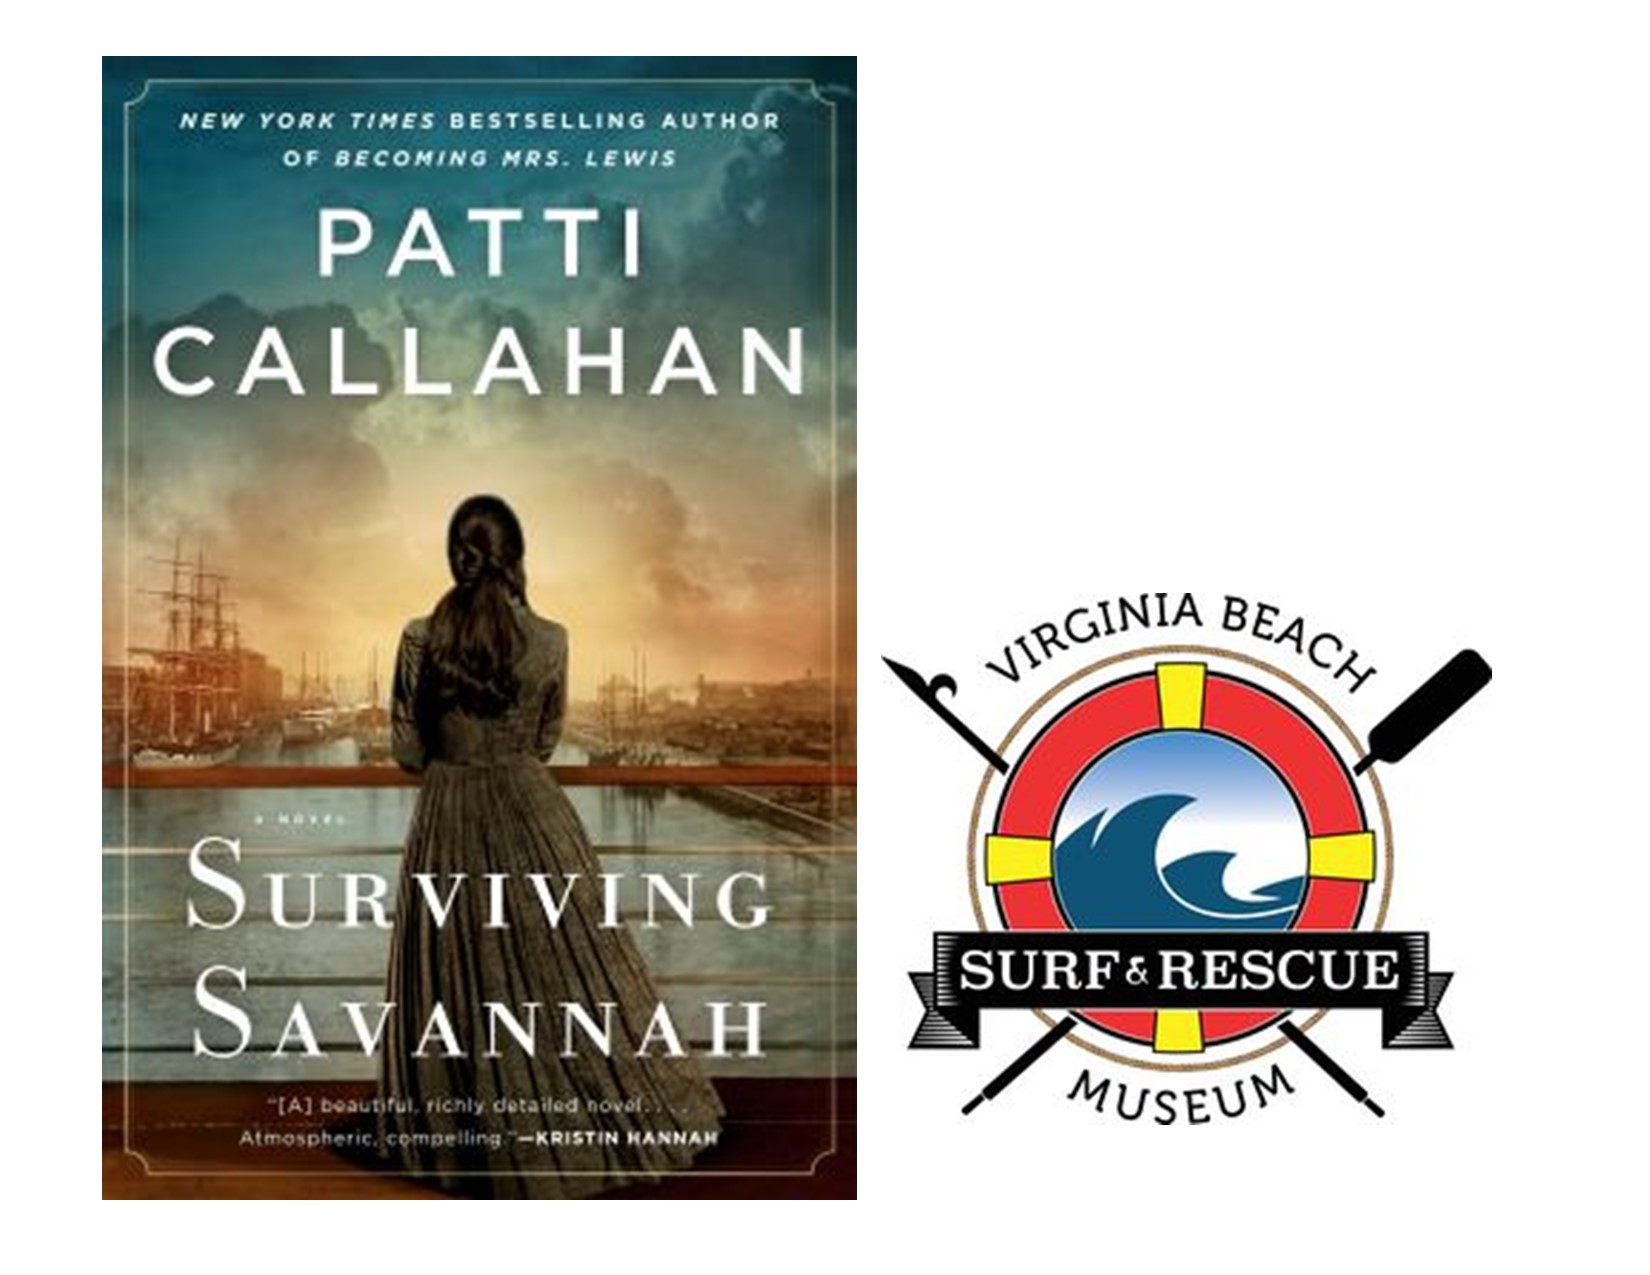 Surviving Savannah book cover and logo for Virginia Beach Surf and Rescue Museum